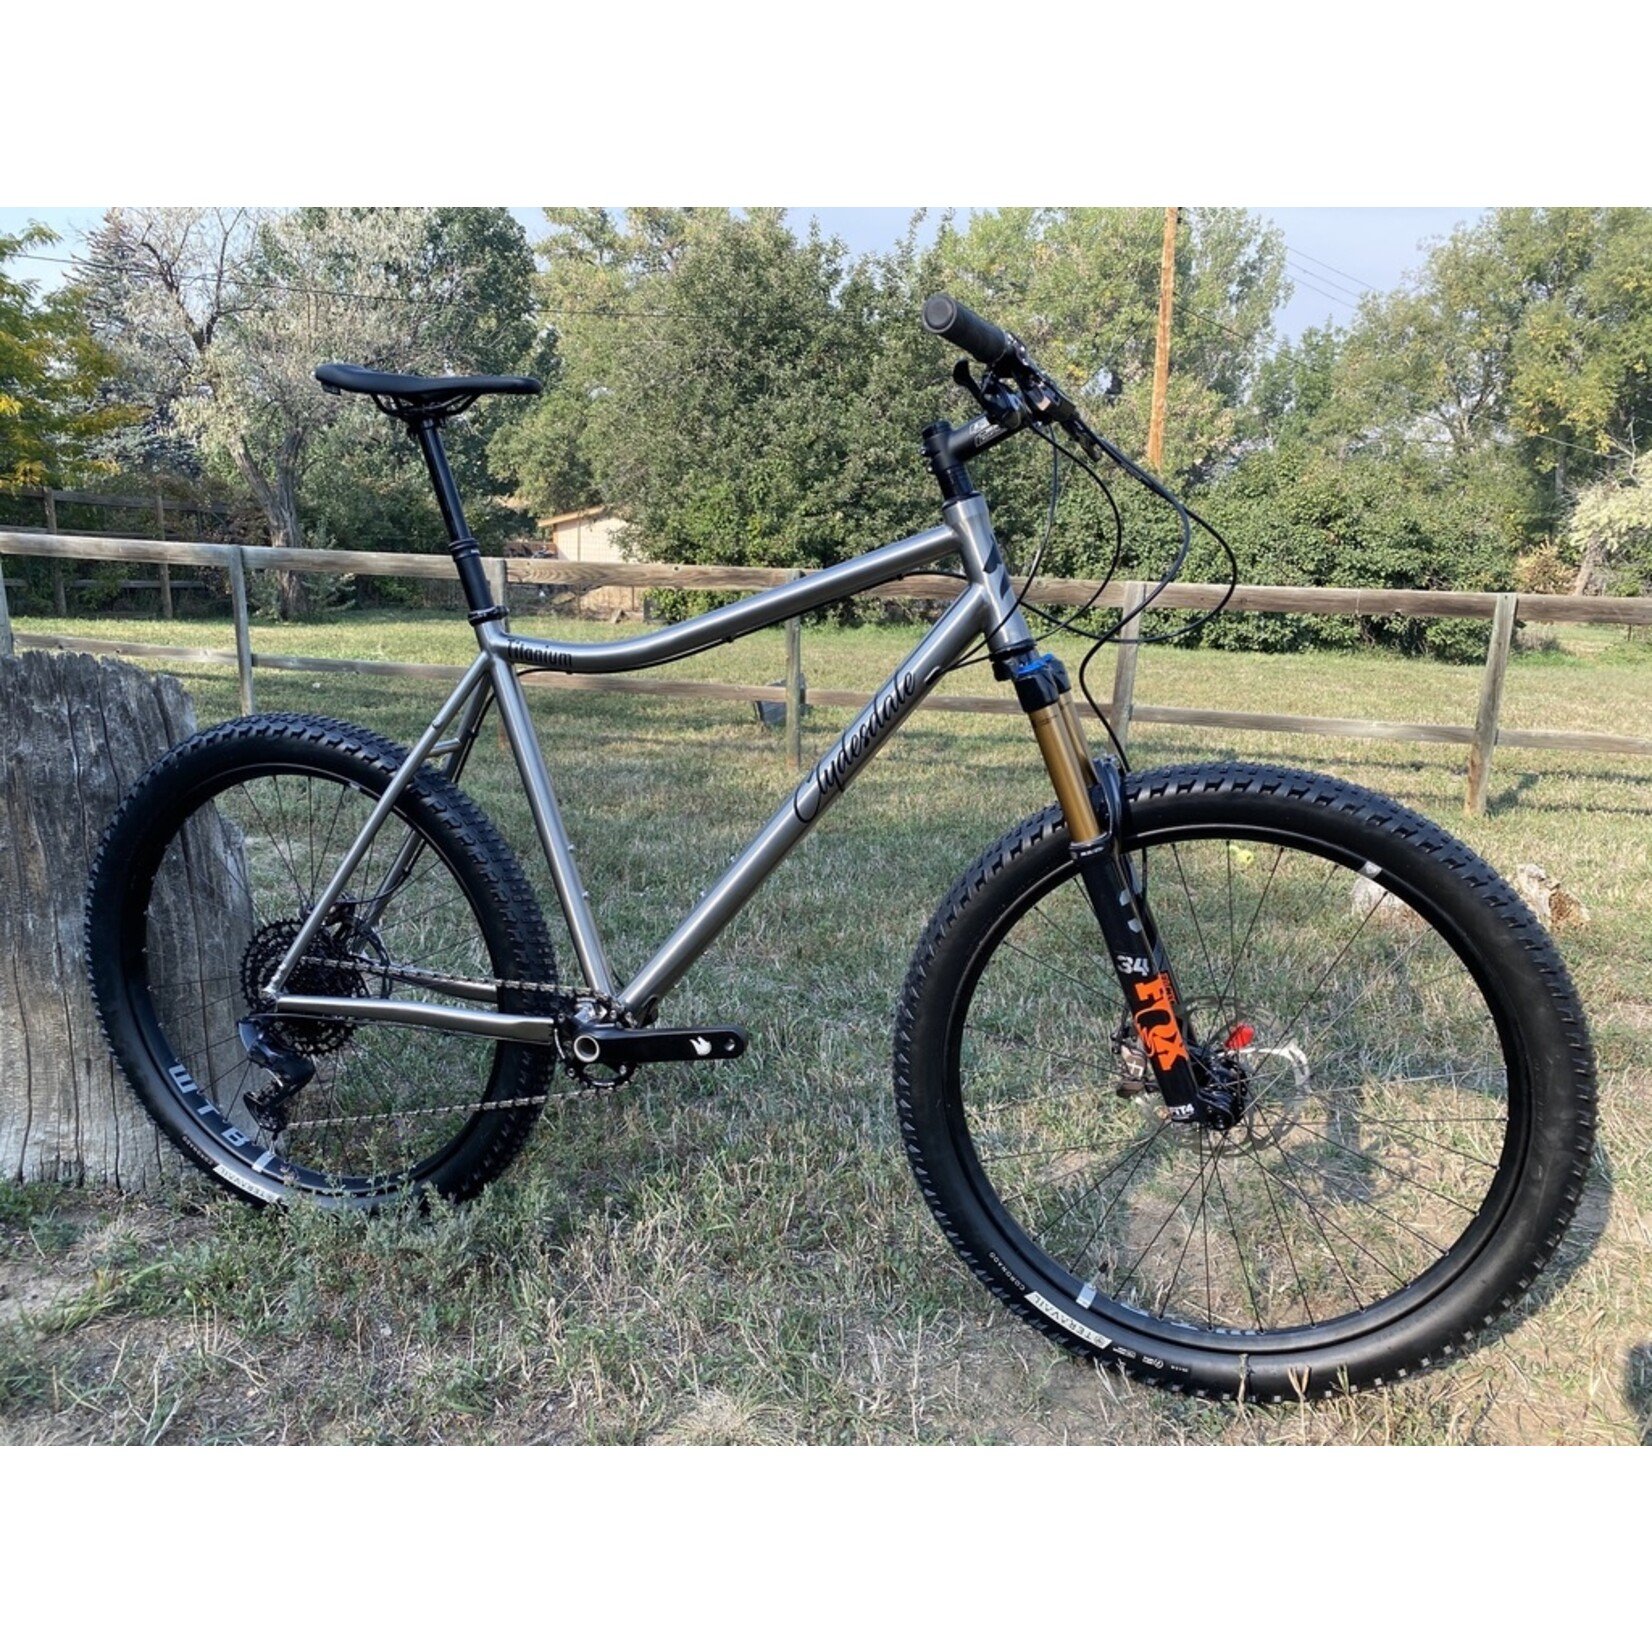 Clydesdale Clydesdale Steer - Titanium Mountain Bike